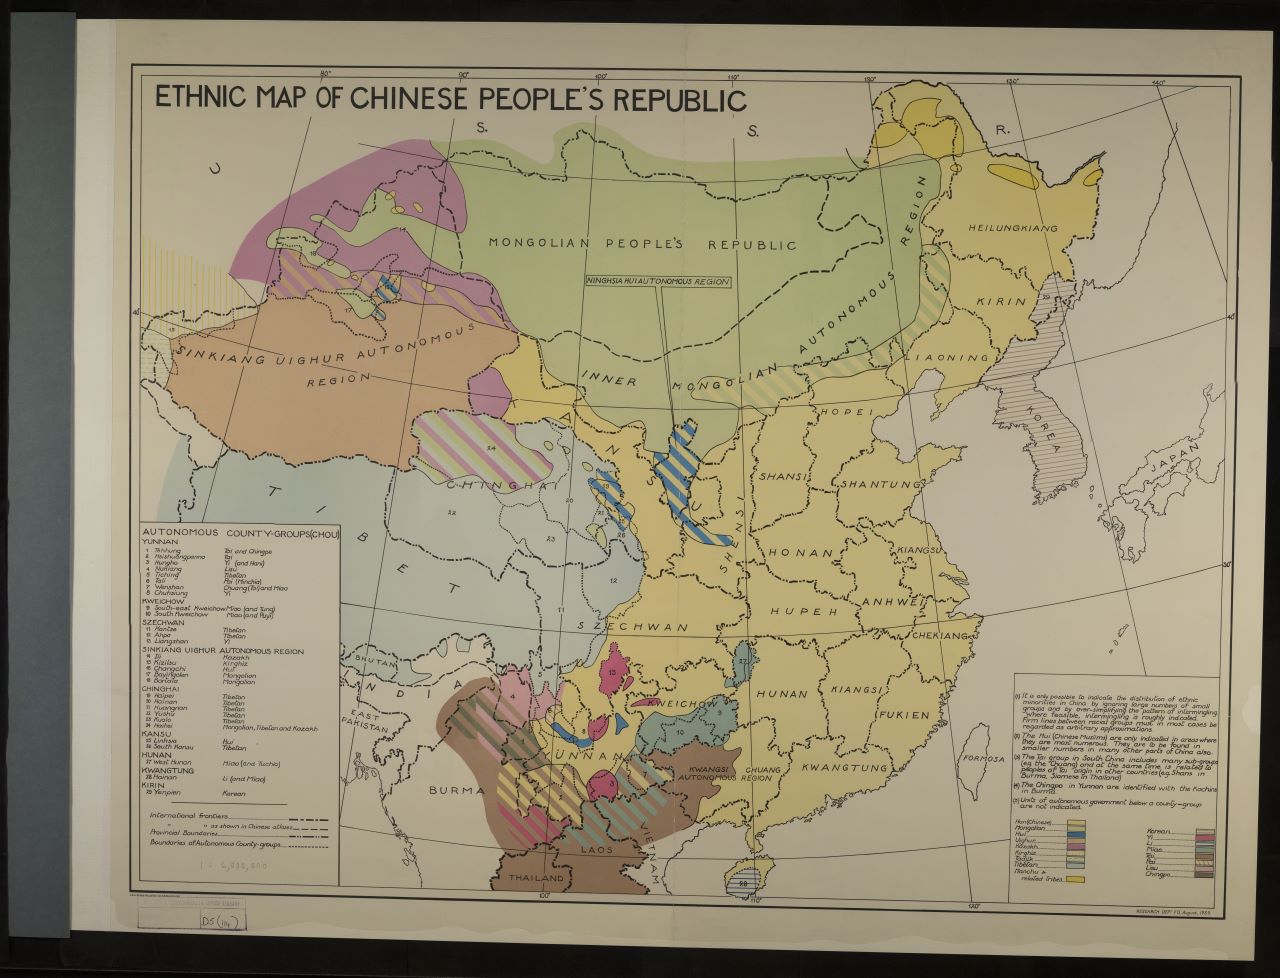 CO 1054/52 Ethnic map of People's Republic of China, 1959